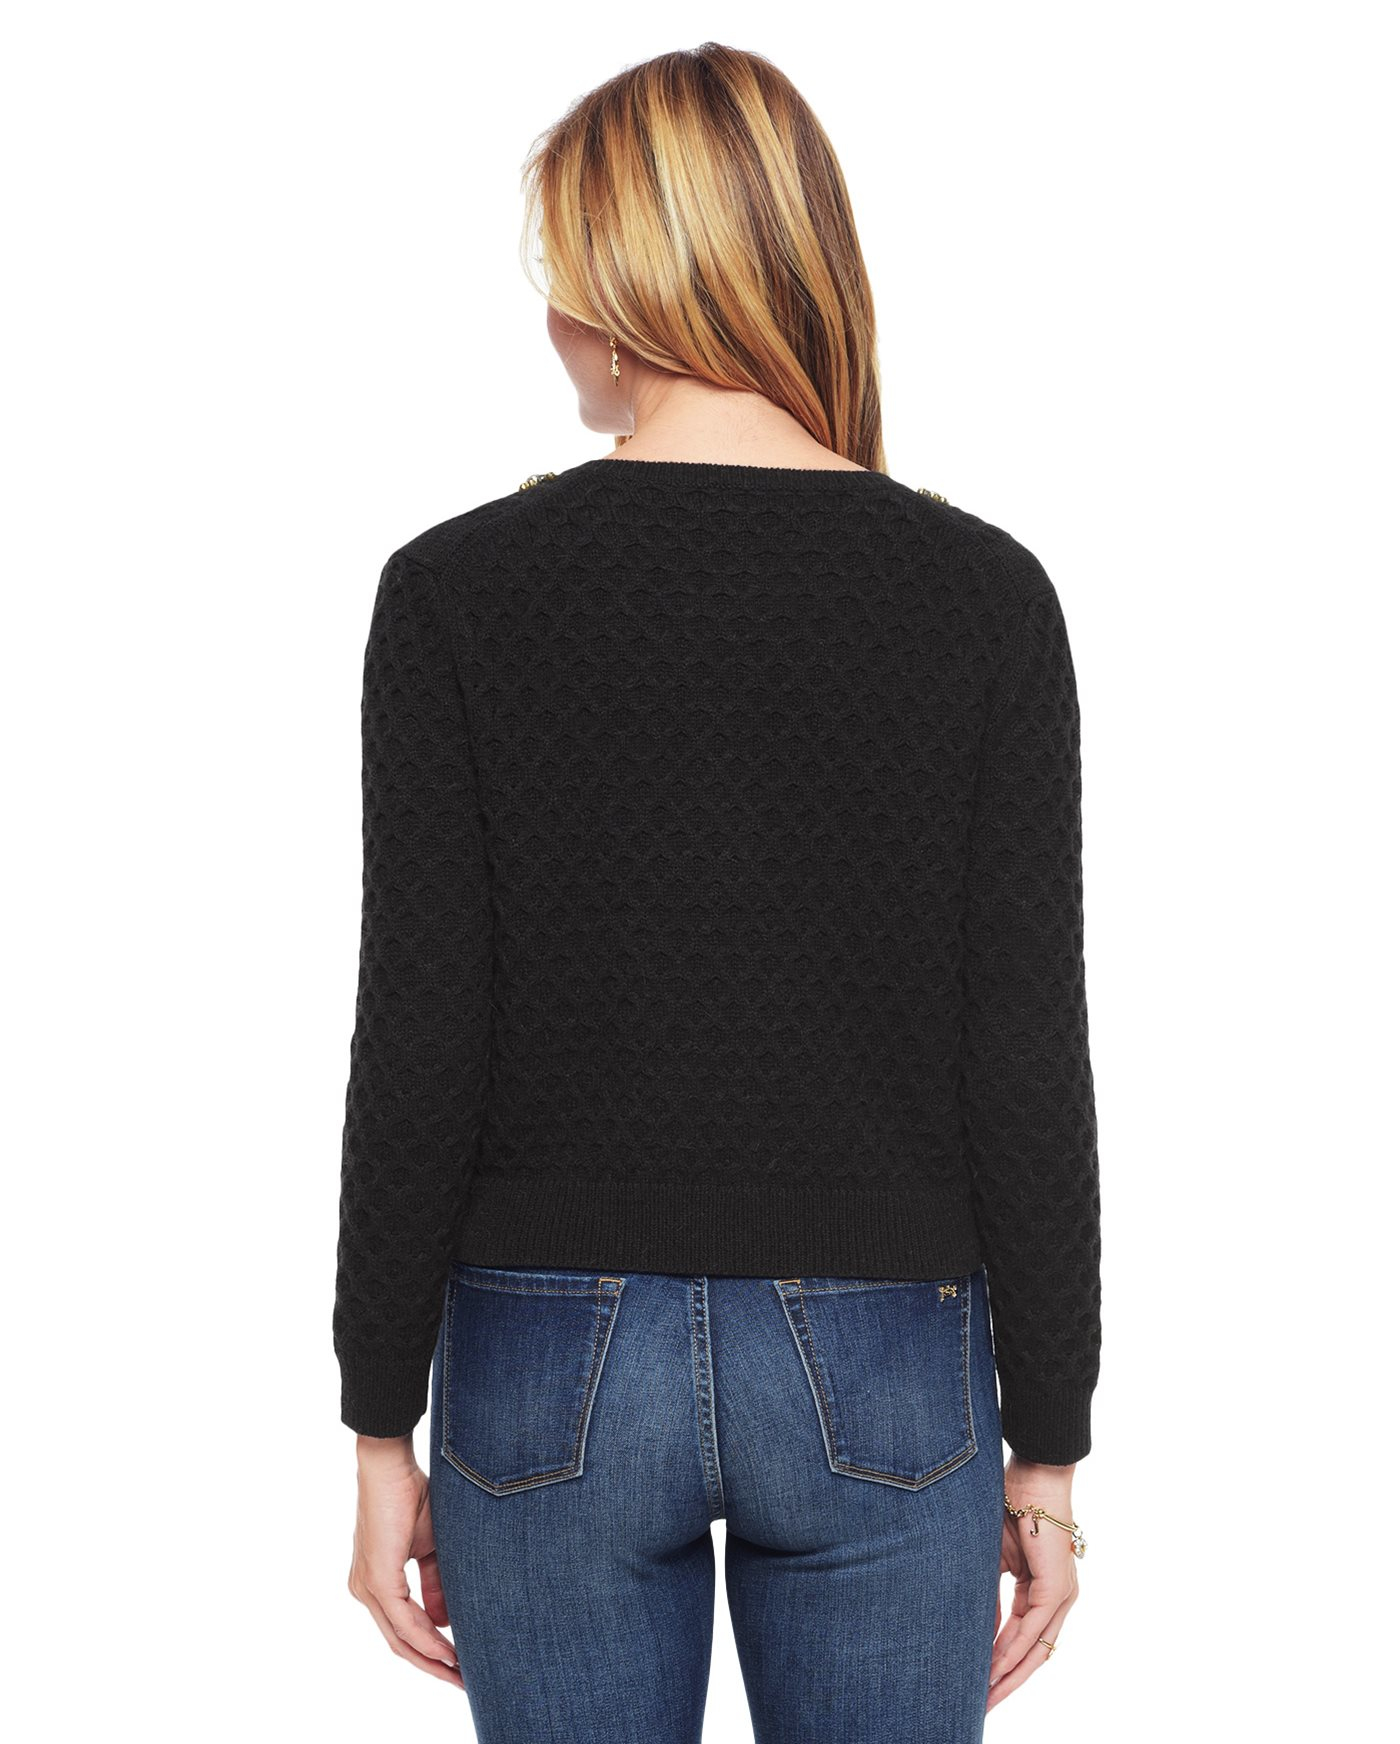 Juicy couture Embellished Cable Sweater Cardigan in Black | Lyst